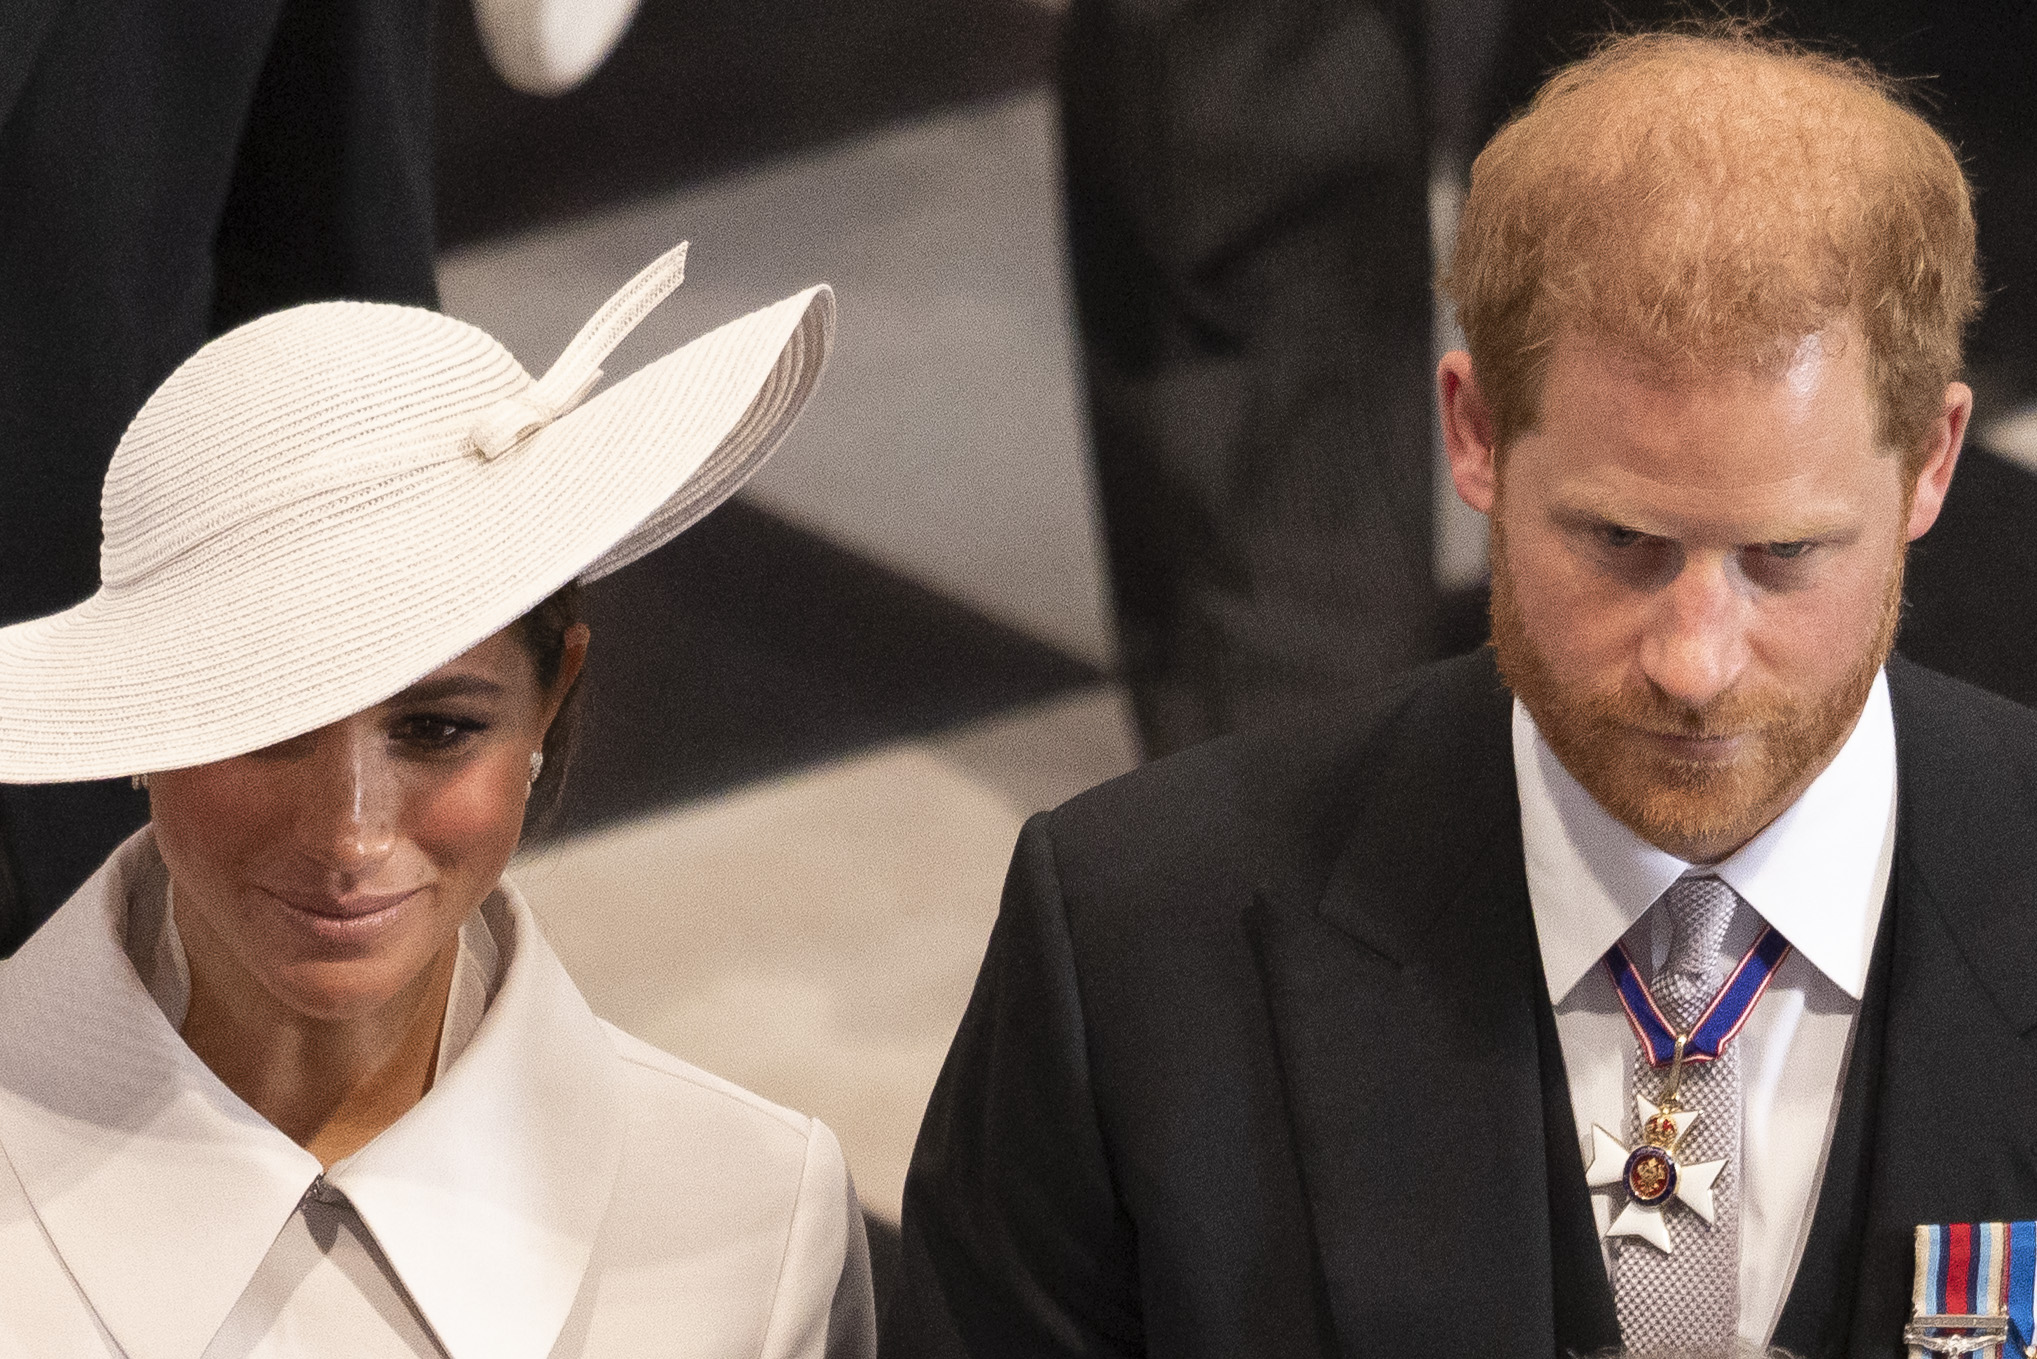 Harry Travels Without Meghan to Queen Elizabeth II’s Side Amid Serious Health Problems